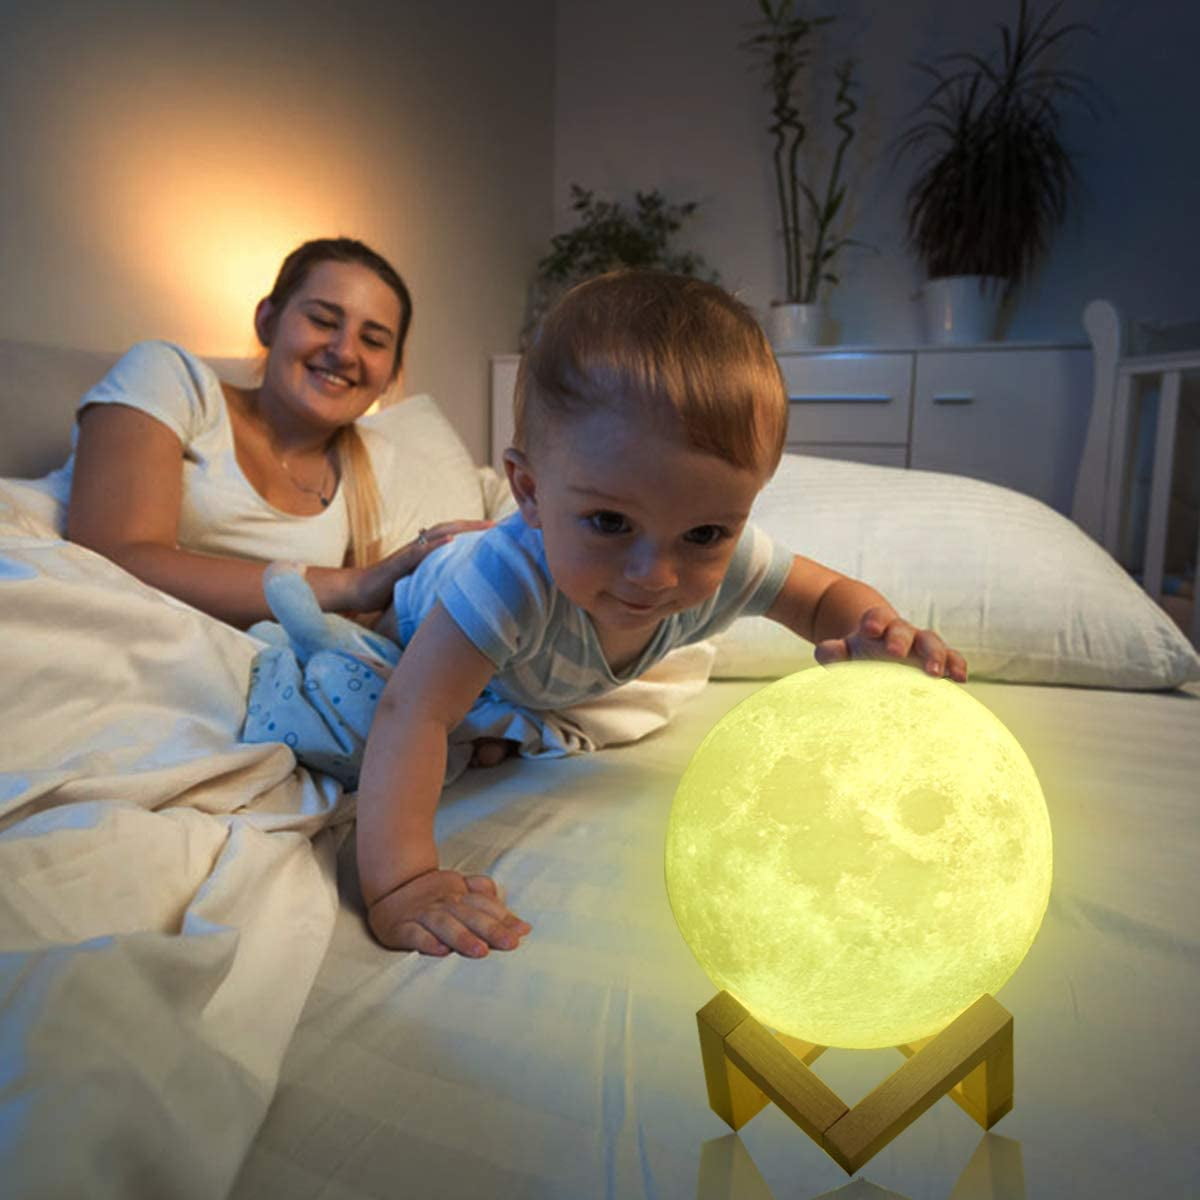 Moon Lamp 3D Printed Dimmable Timer Moonlight Lunar Night Lamp Decor Birthday Gifts for Lover Kids Friend Party Bedroom 4.7 Inch 16 Colors with Stand & Remote & Touch Control & USB Rechargeable